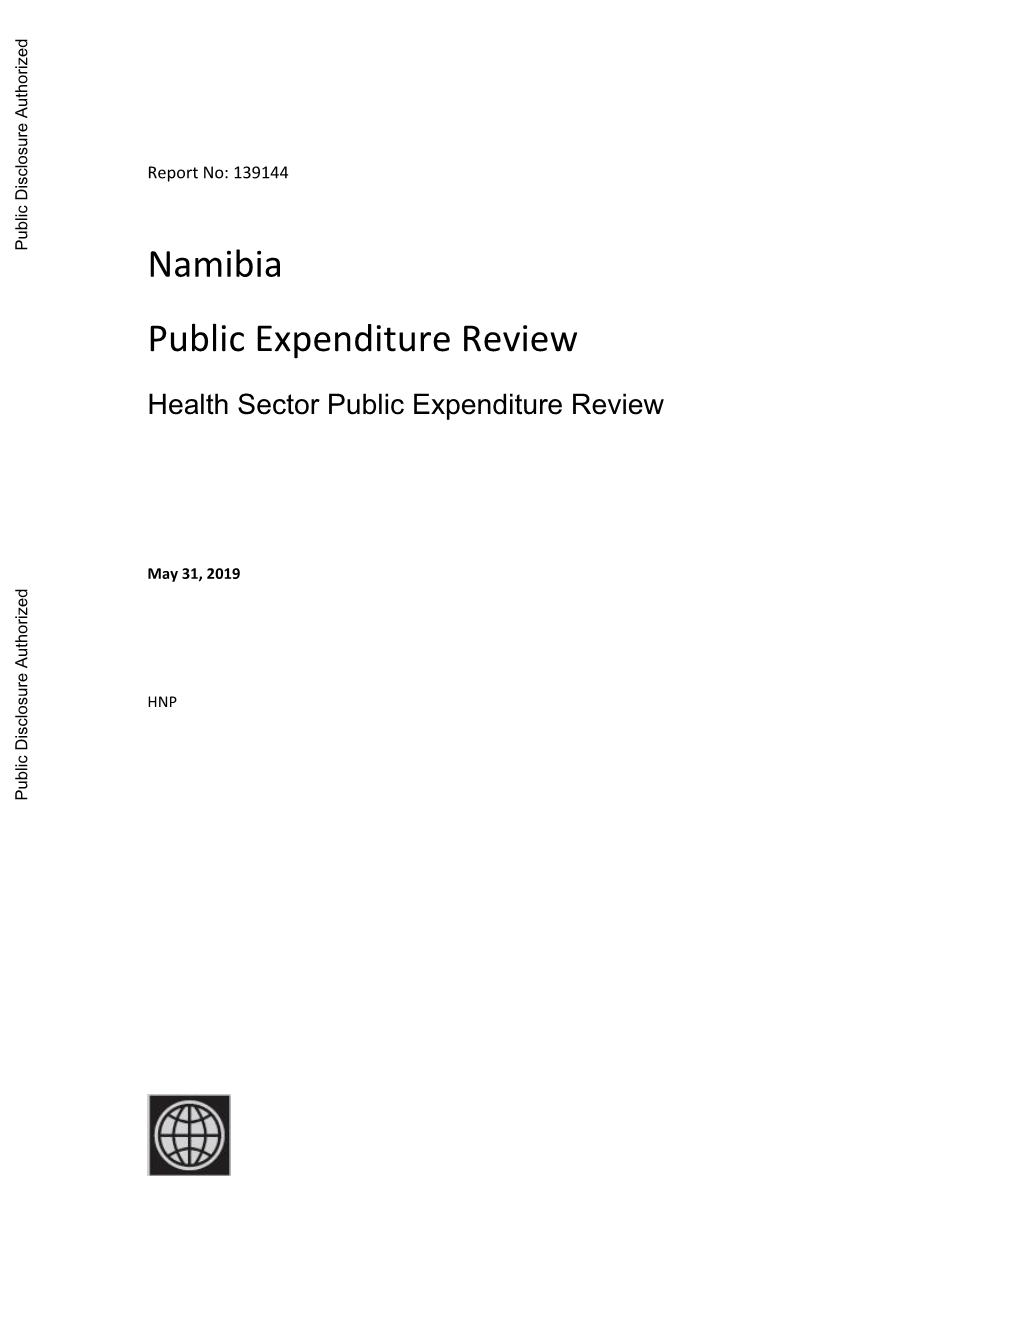 Namibia Public Expenditure Review